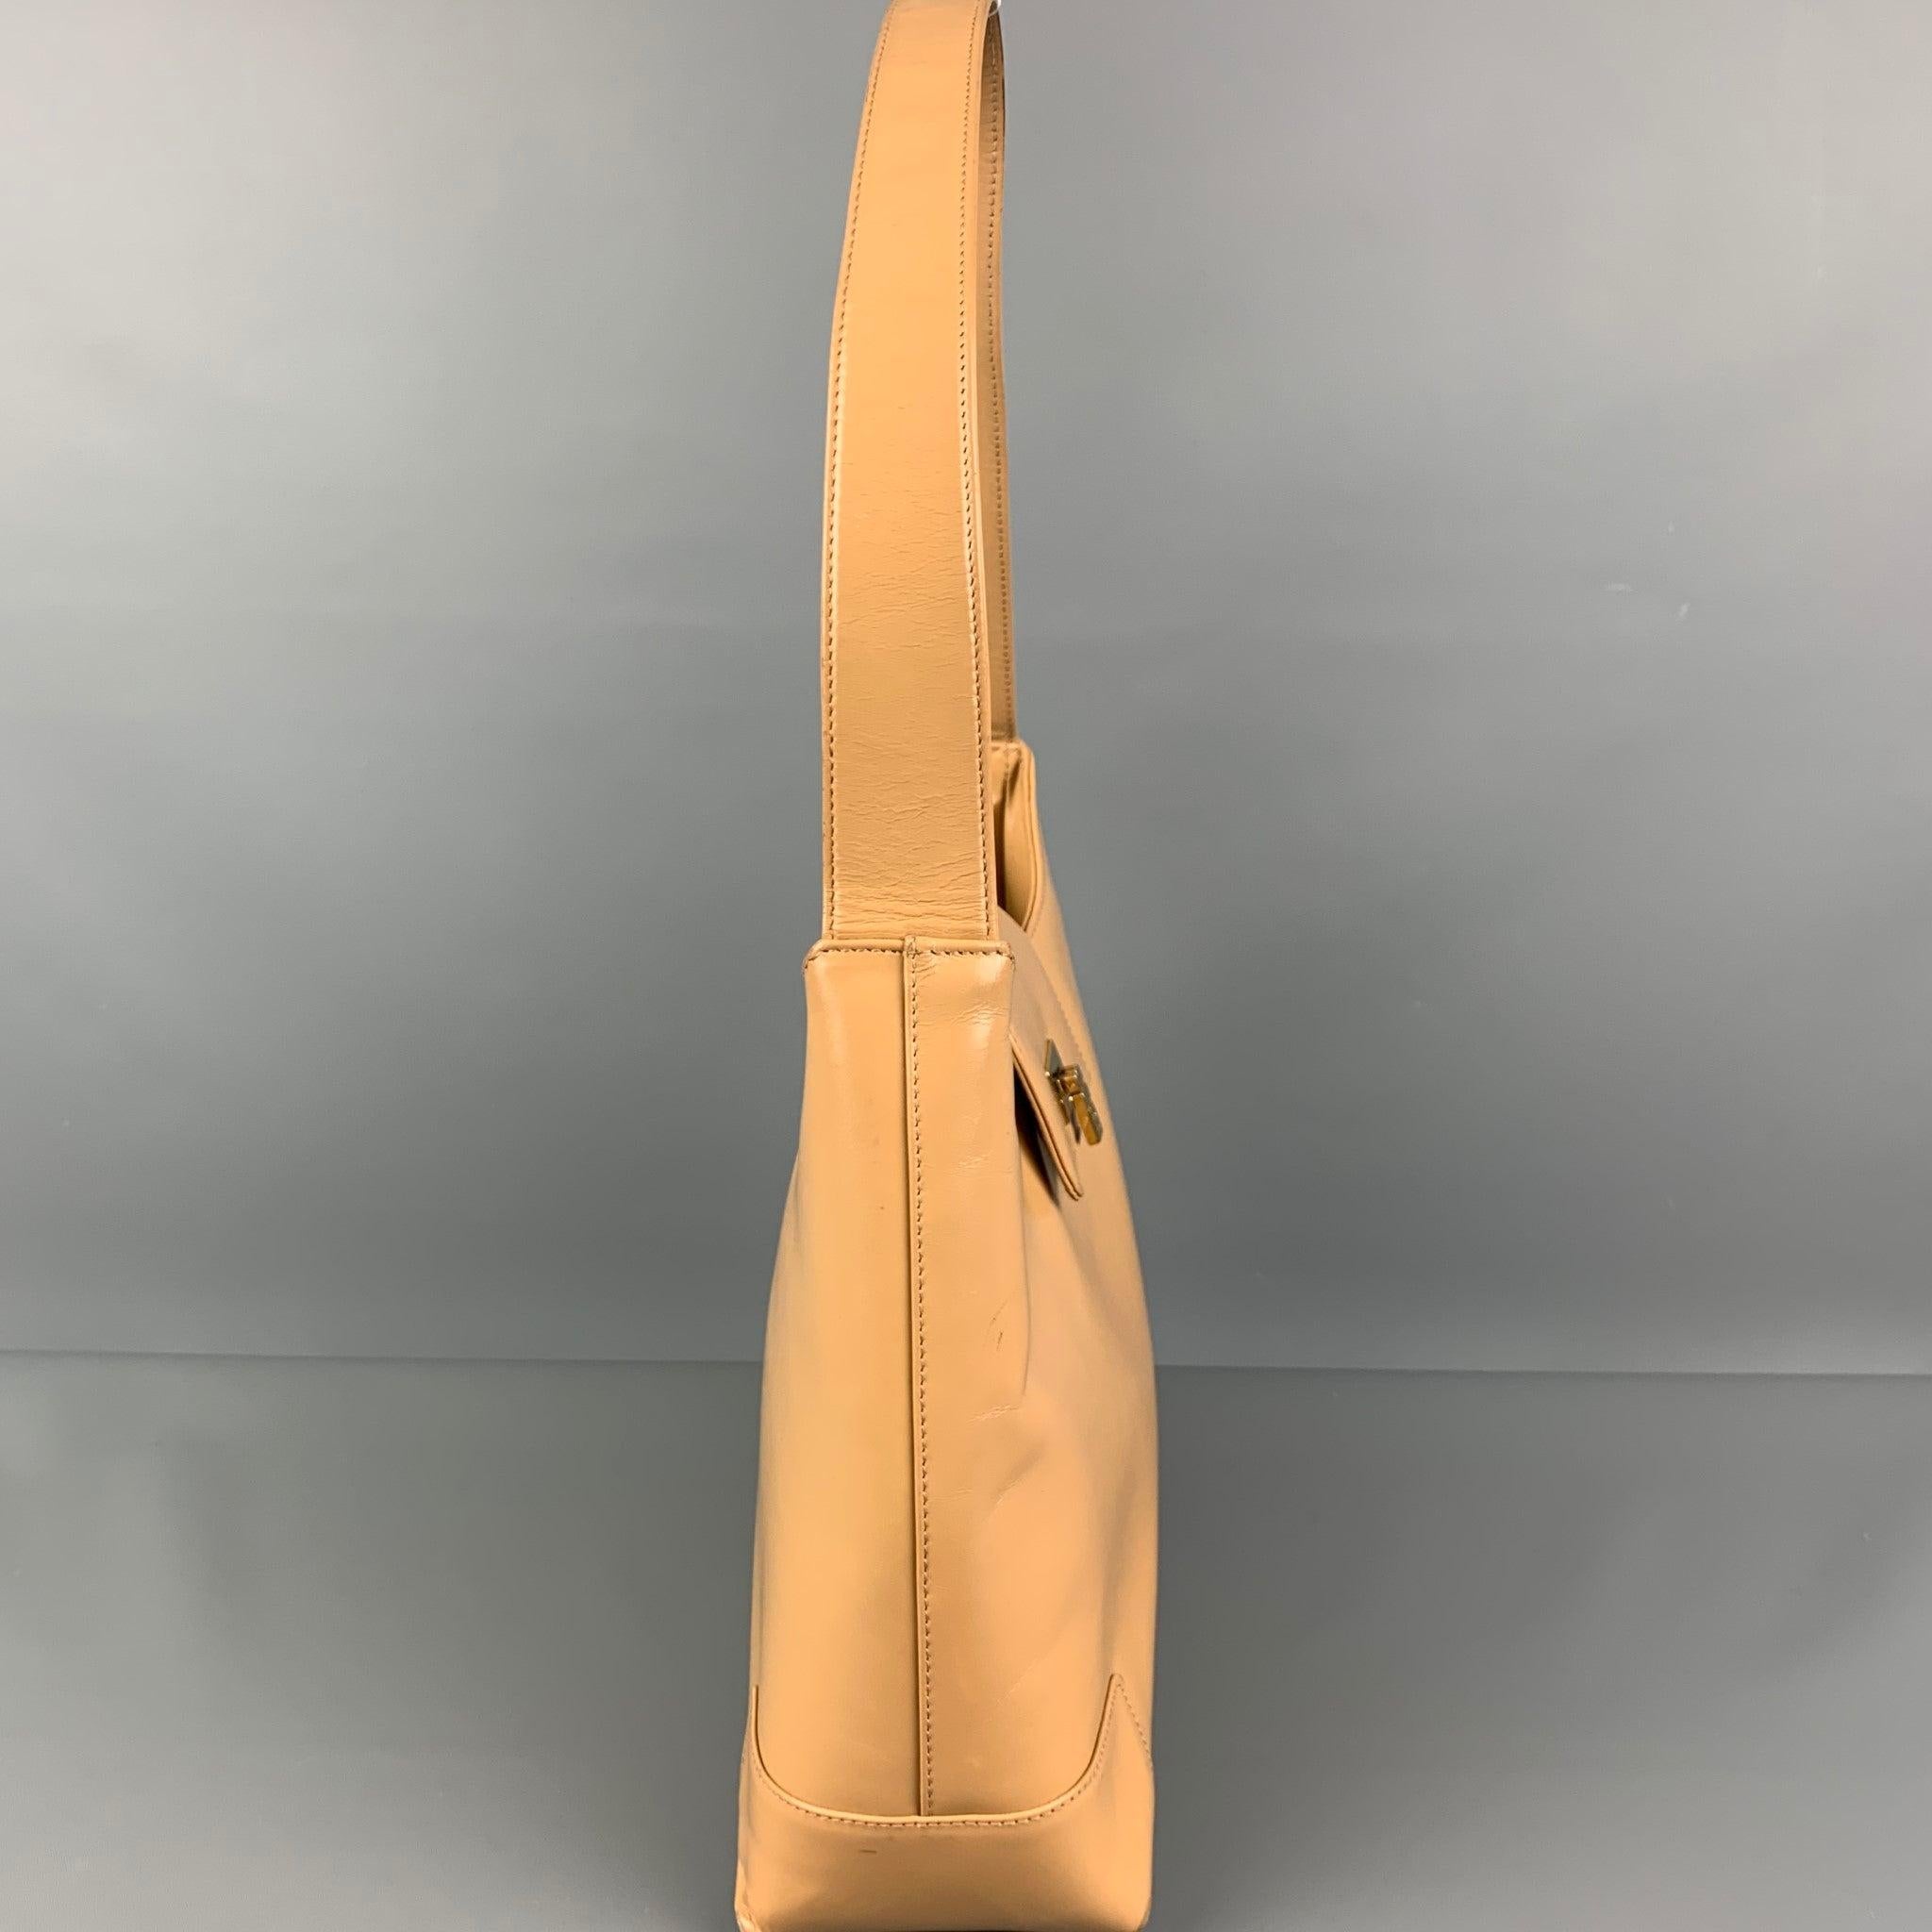 LAMBERTSON TRUEX handbag comes in a beige leather featuring a top handle, inner slots, and a gold tone clasp closure. Made in Italy.
Good
Pre-Owned Condition. Minor wear & marks. 

Measurements: 
  Length: 11 inches  Width: 3.5 inches  Height: 9